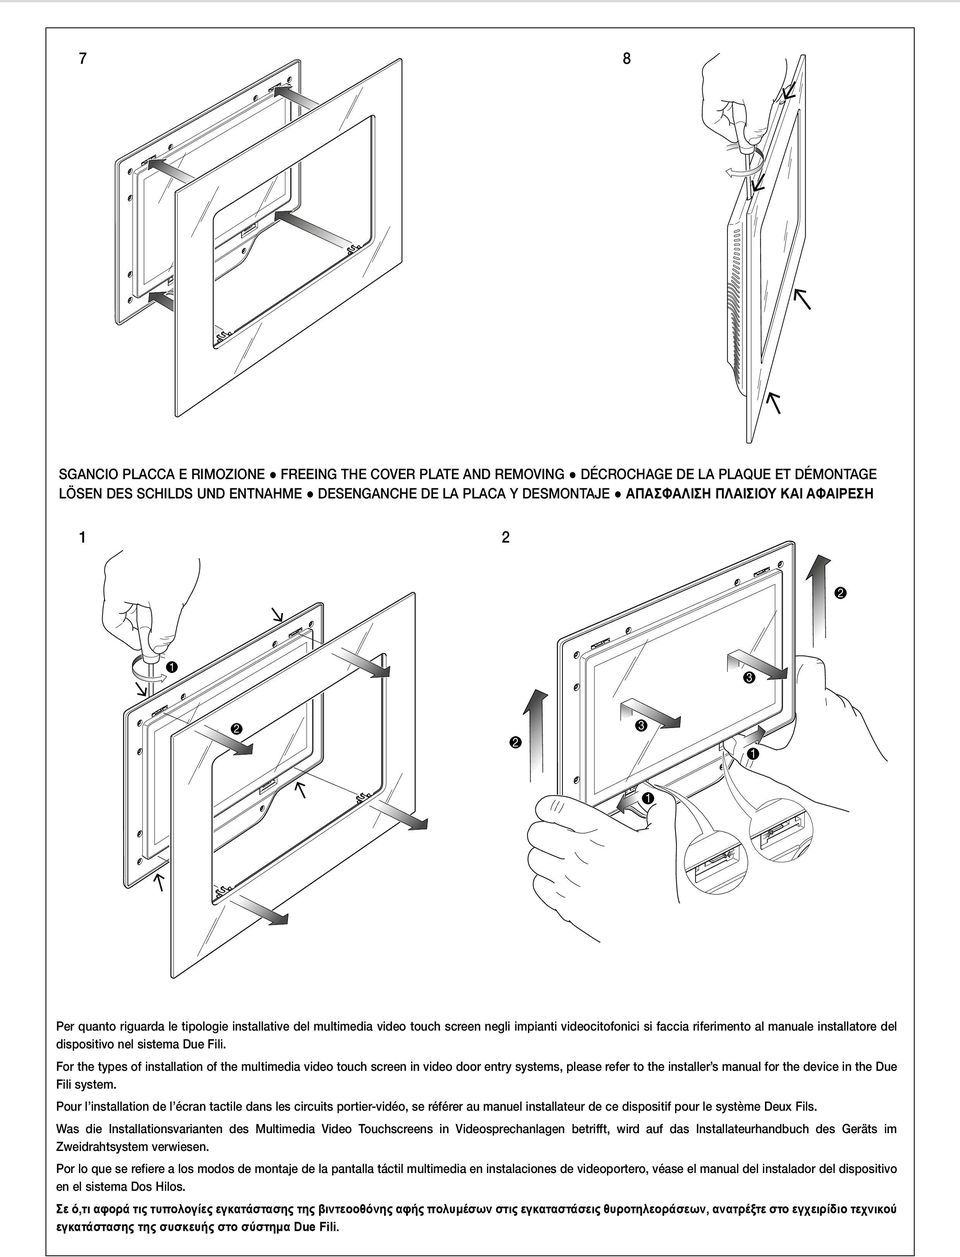 Due Fili. For the types of installation of the multimedia video touch screen in video door entry systems, please refer to the installer s manual for the device in the Due Fili system.